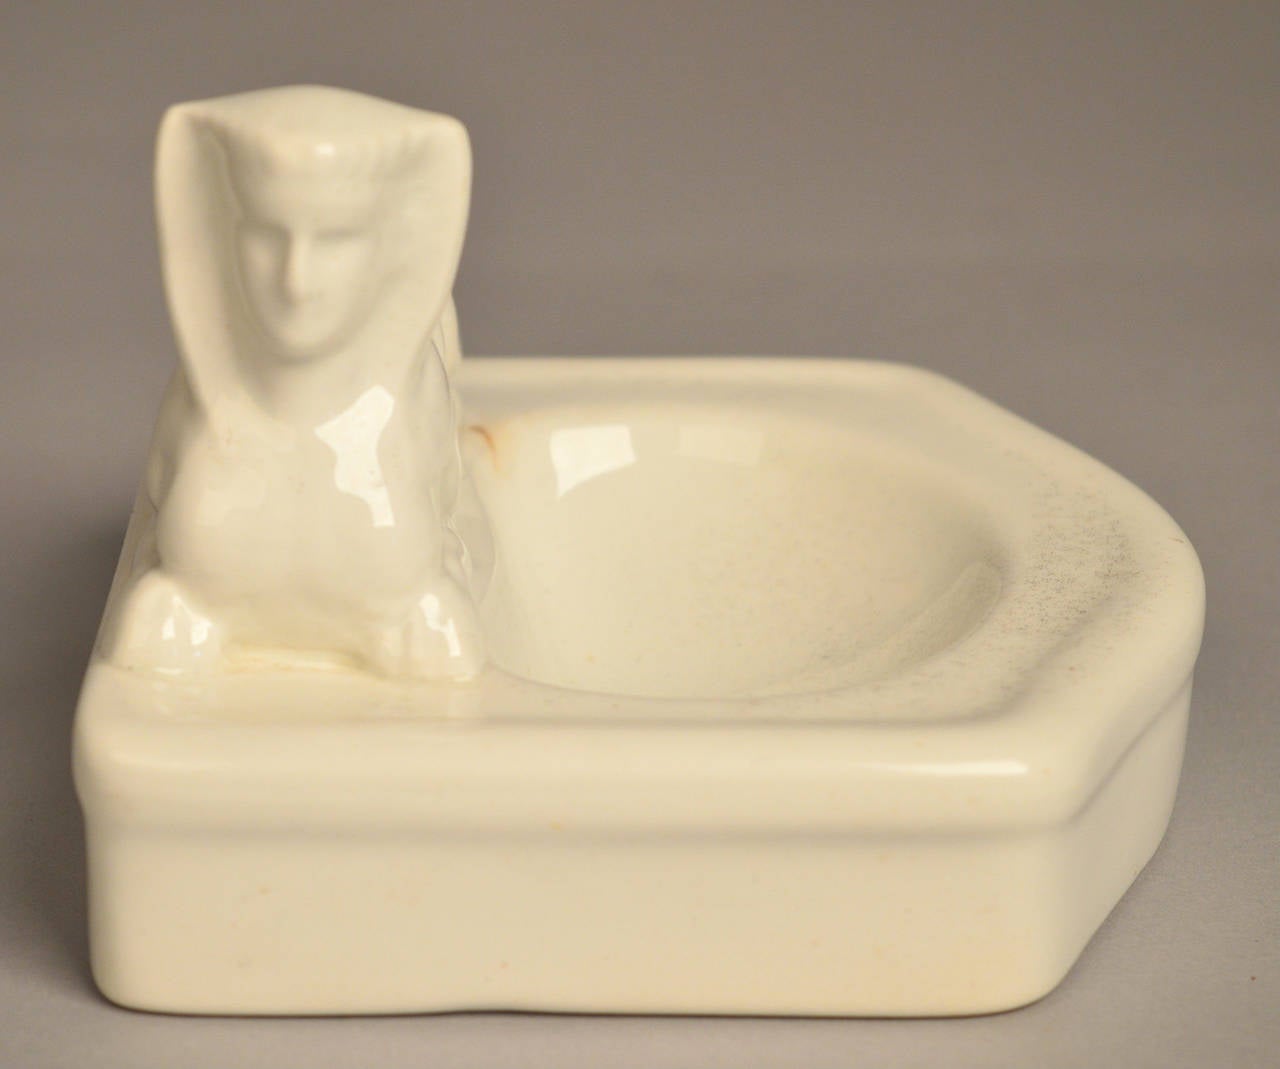 A Belgian white glazed ceramic (ironstone) soap dish circa 1880.
This egyptian revival sphinx design is rare so the fact that it has a chip at the underside of the base is acceptable.
***The chip is not visable unless turned upside down(as shown